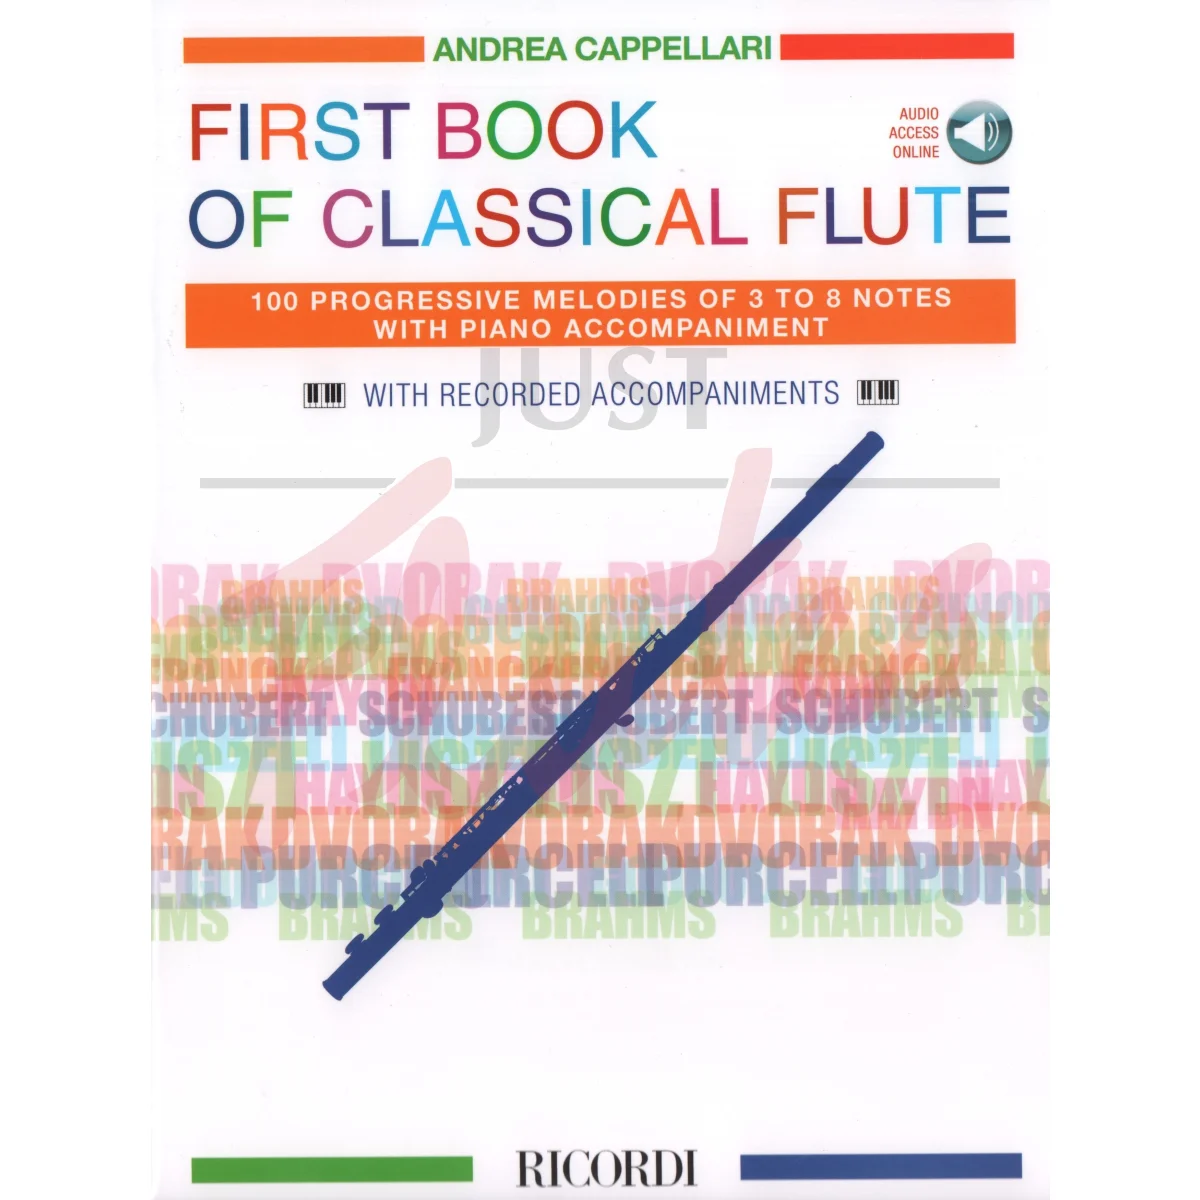 First Book of Classical Flute with Piano Accompaniment